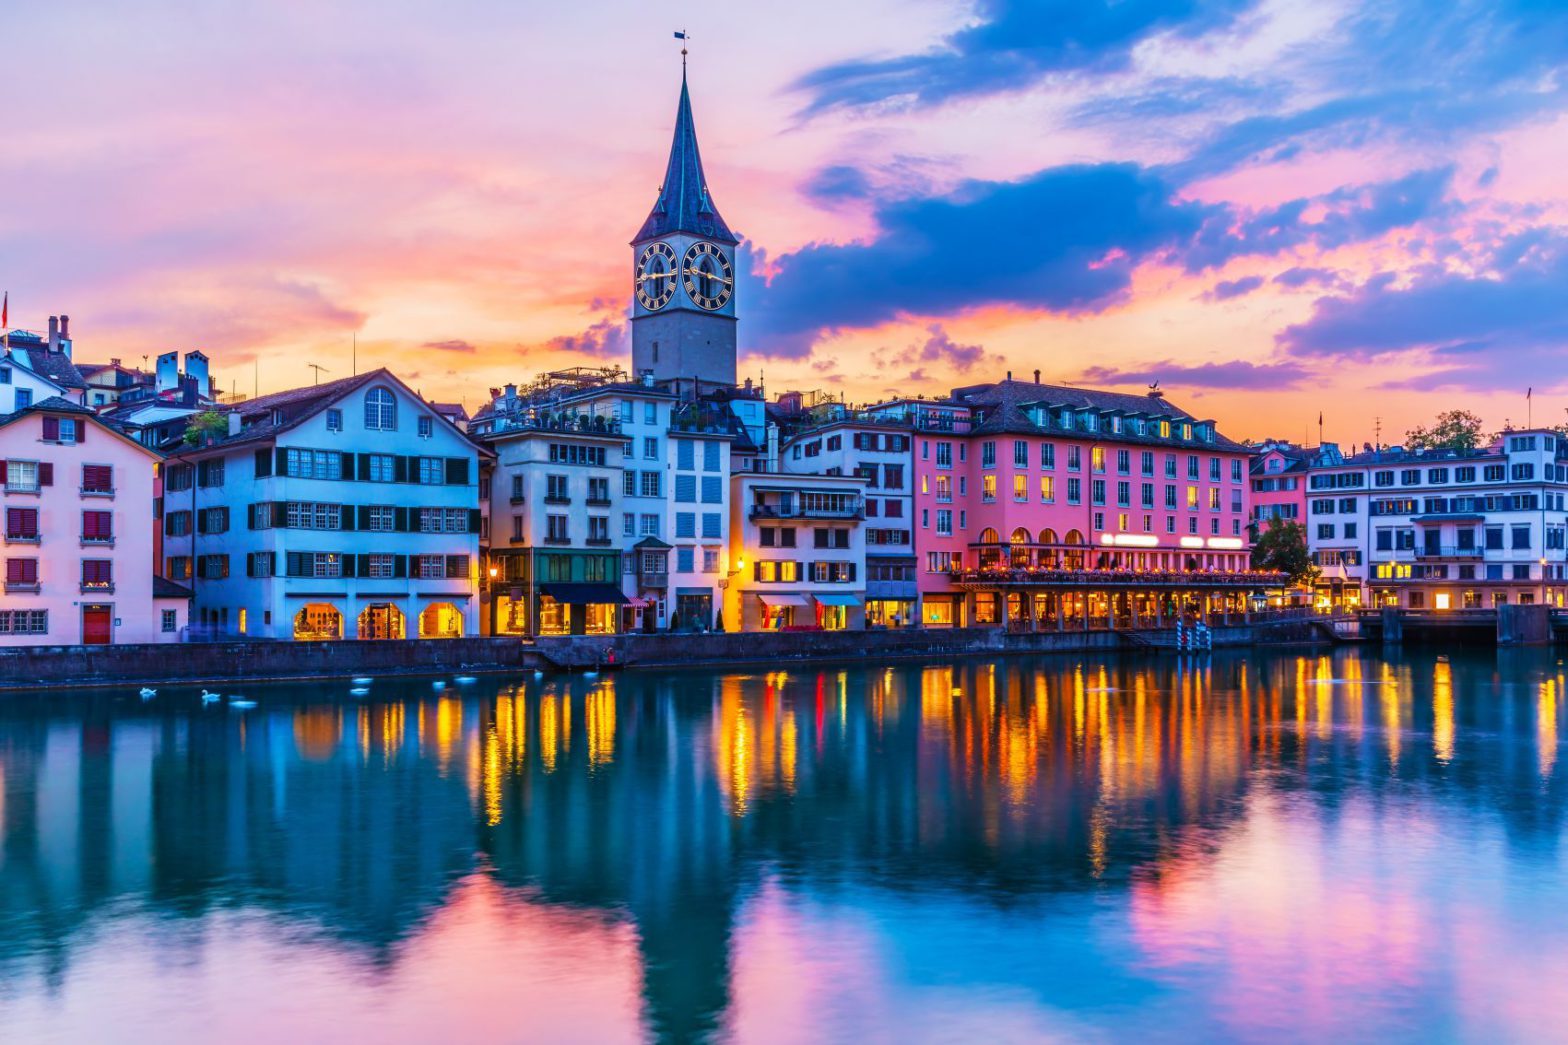 Reflective glory of Zurich's old town